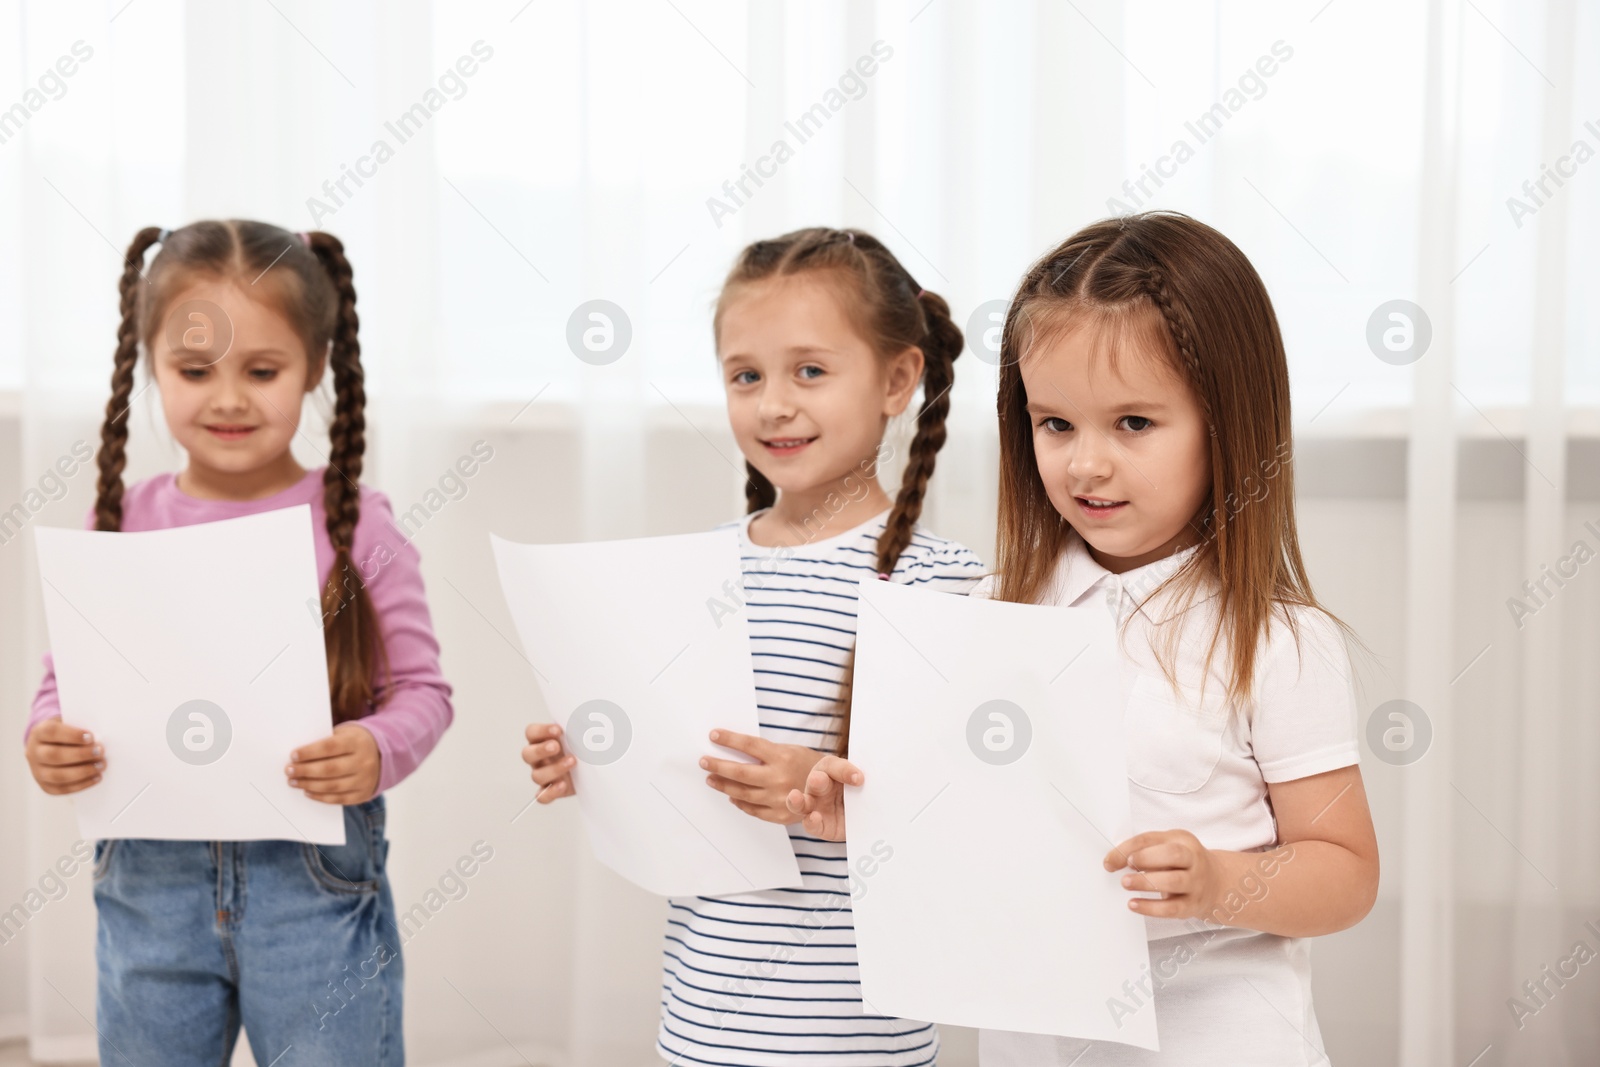 Photo of Cute little children with sheets of paper singing indoors